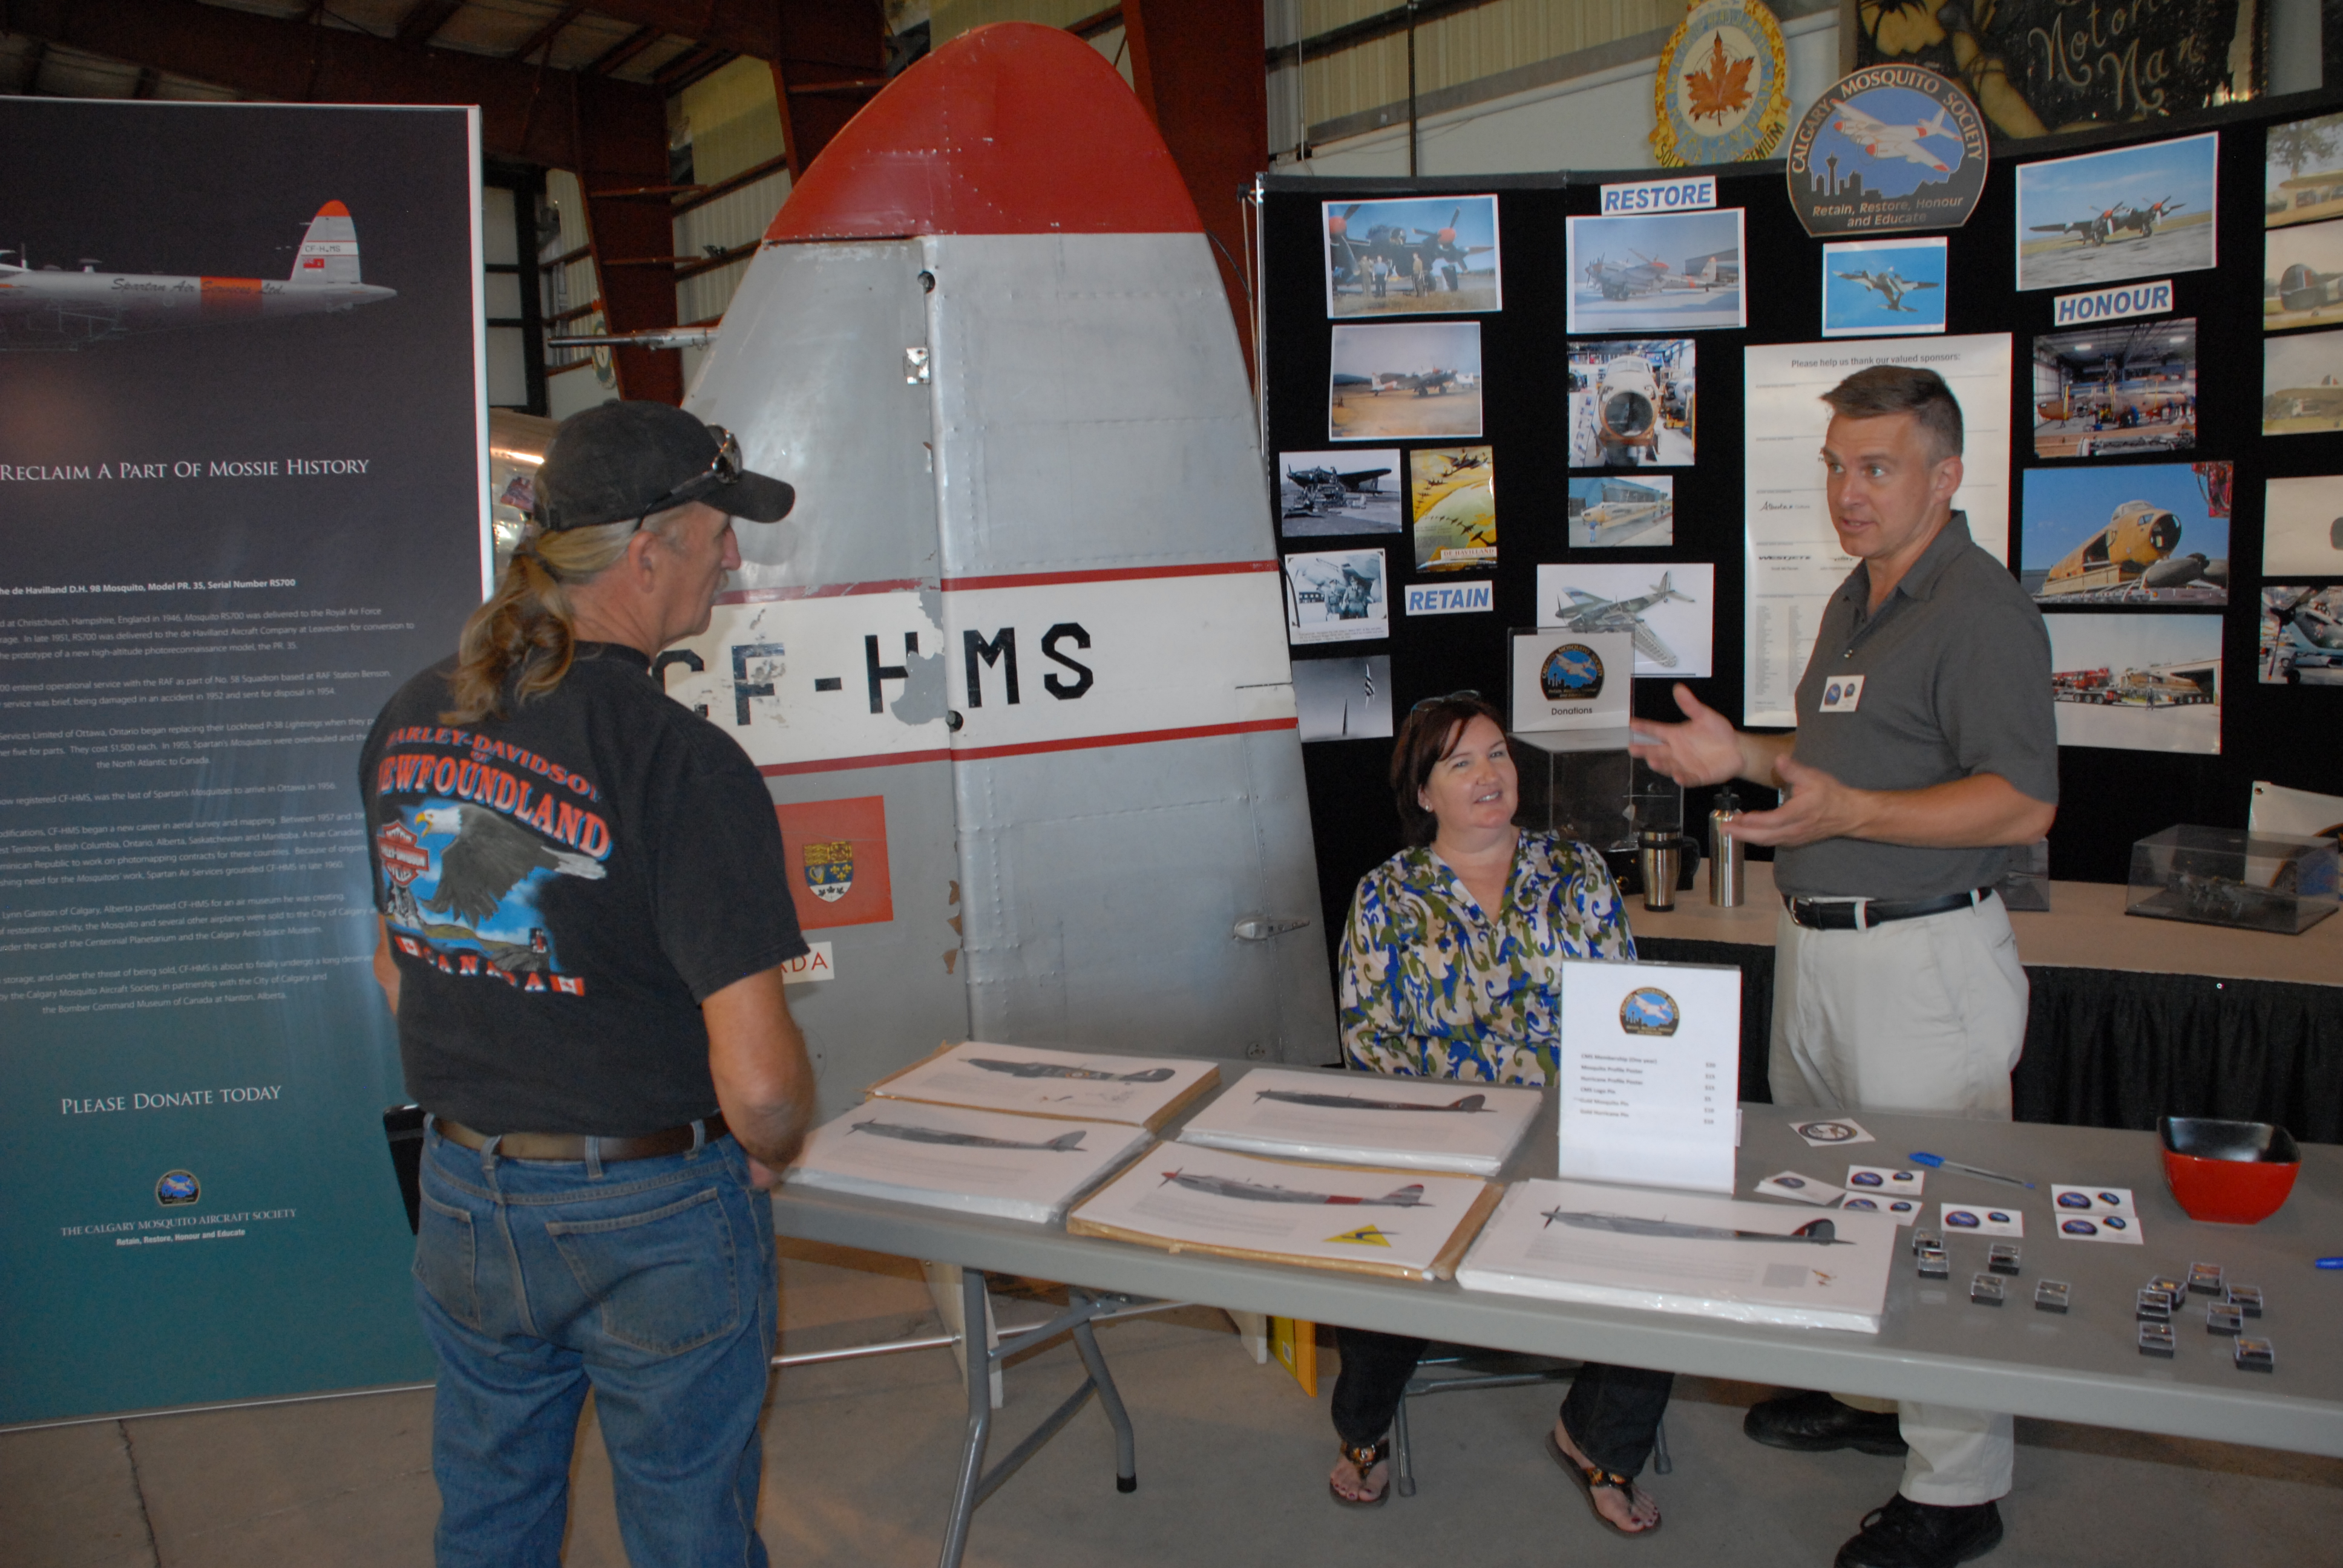 Board members Colette and Stéphane talk to a visitor during the July 4, Bikes and Bombers event at the Bomber Command Museum.